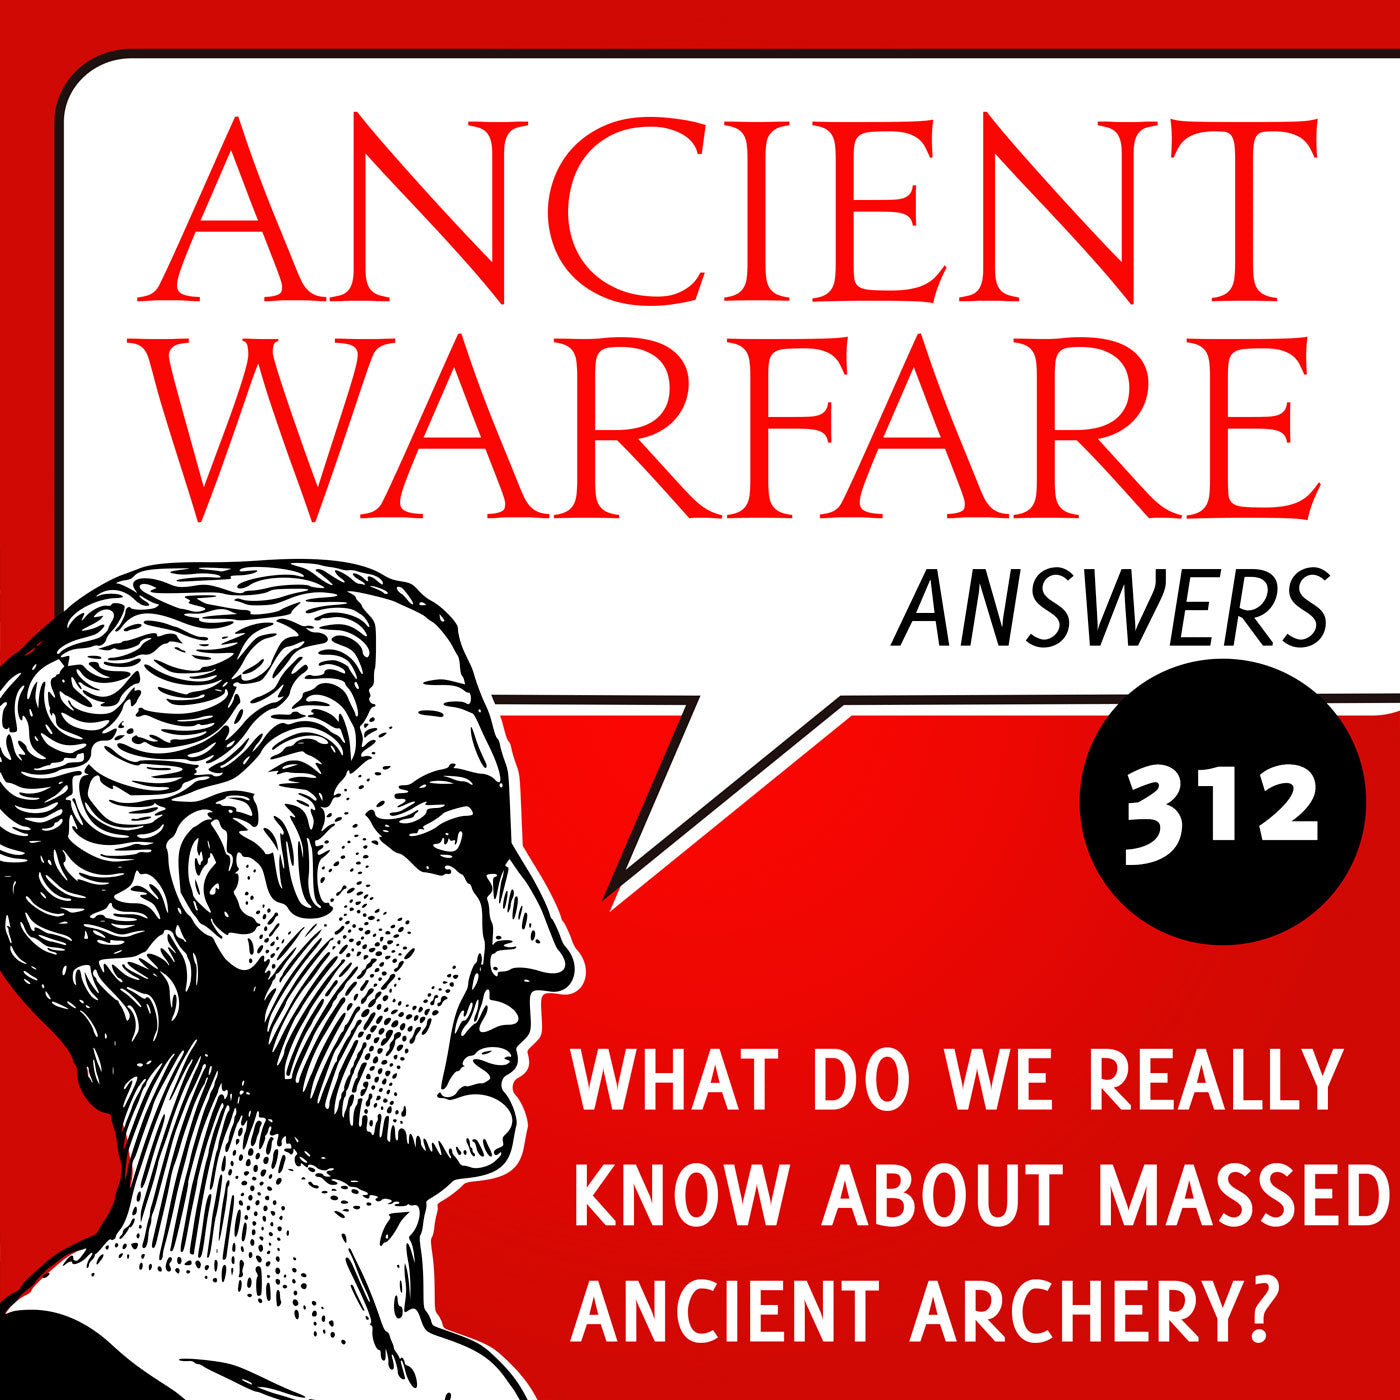 Ancient Warfare Answers (312): What do we really know about massed ancient archery?